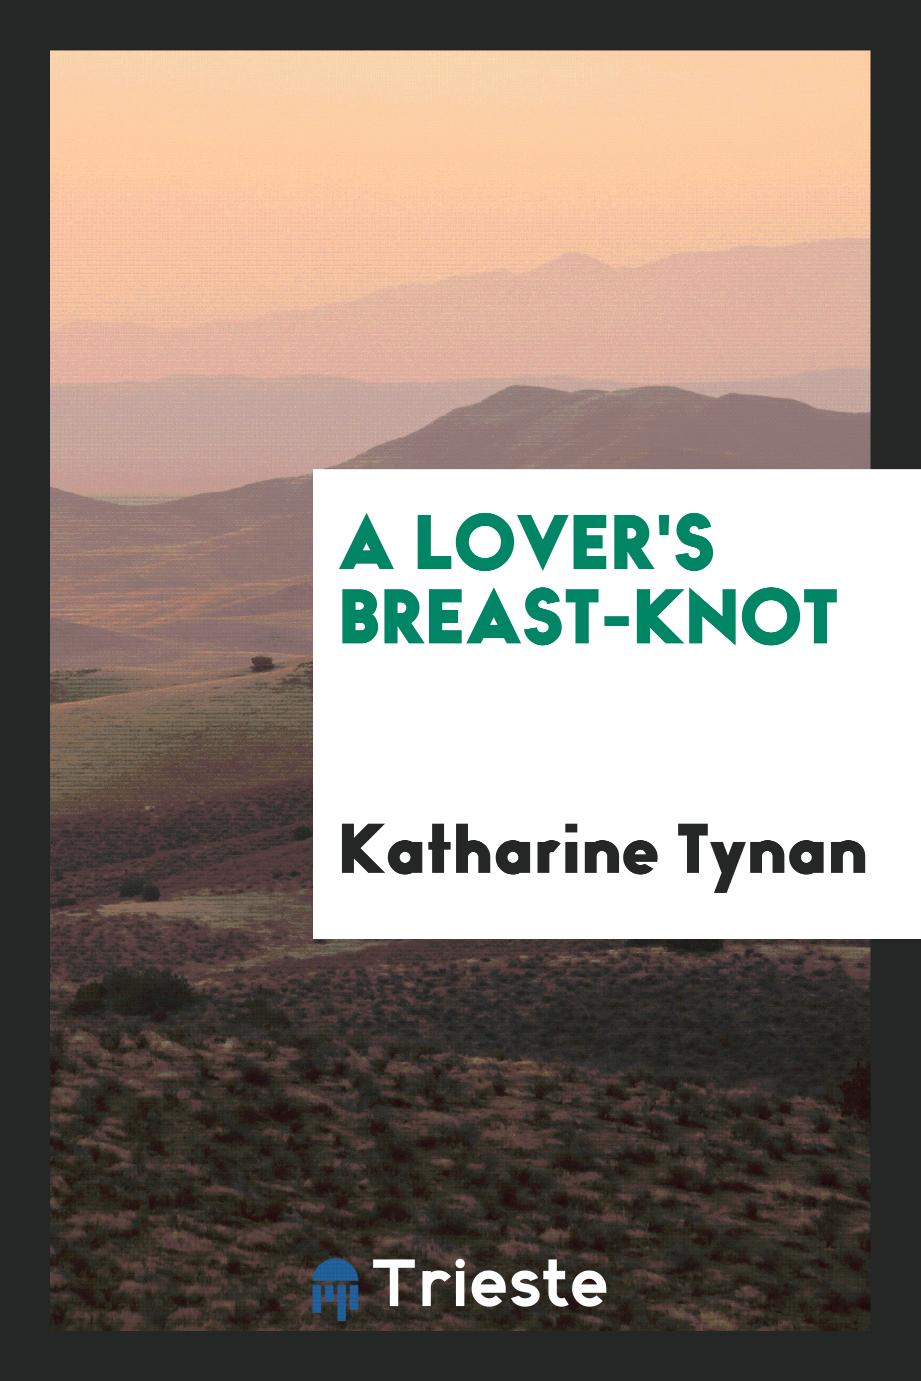 A Lover's Breast-knot